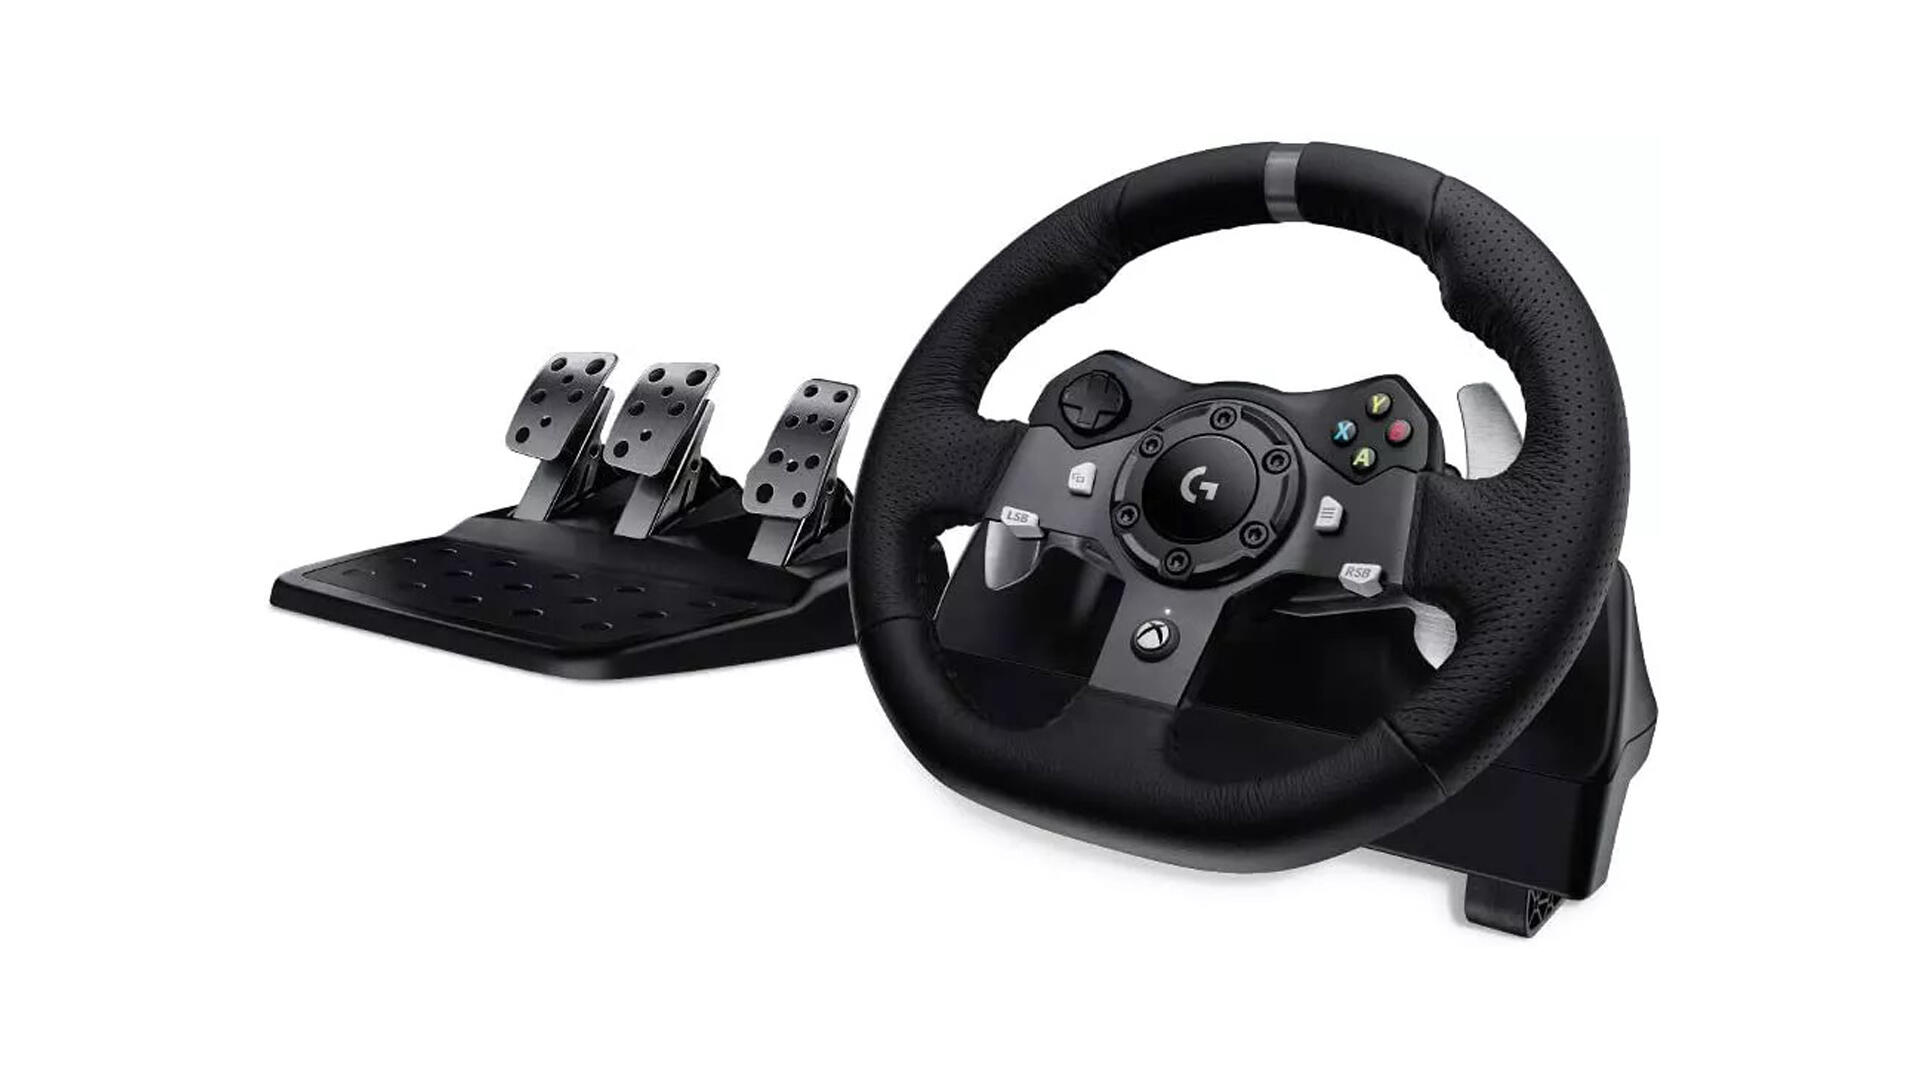 Test : Thrustmaster T150 Force Feedback pour PC, PS3 et PS4